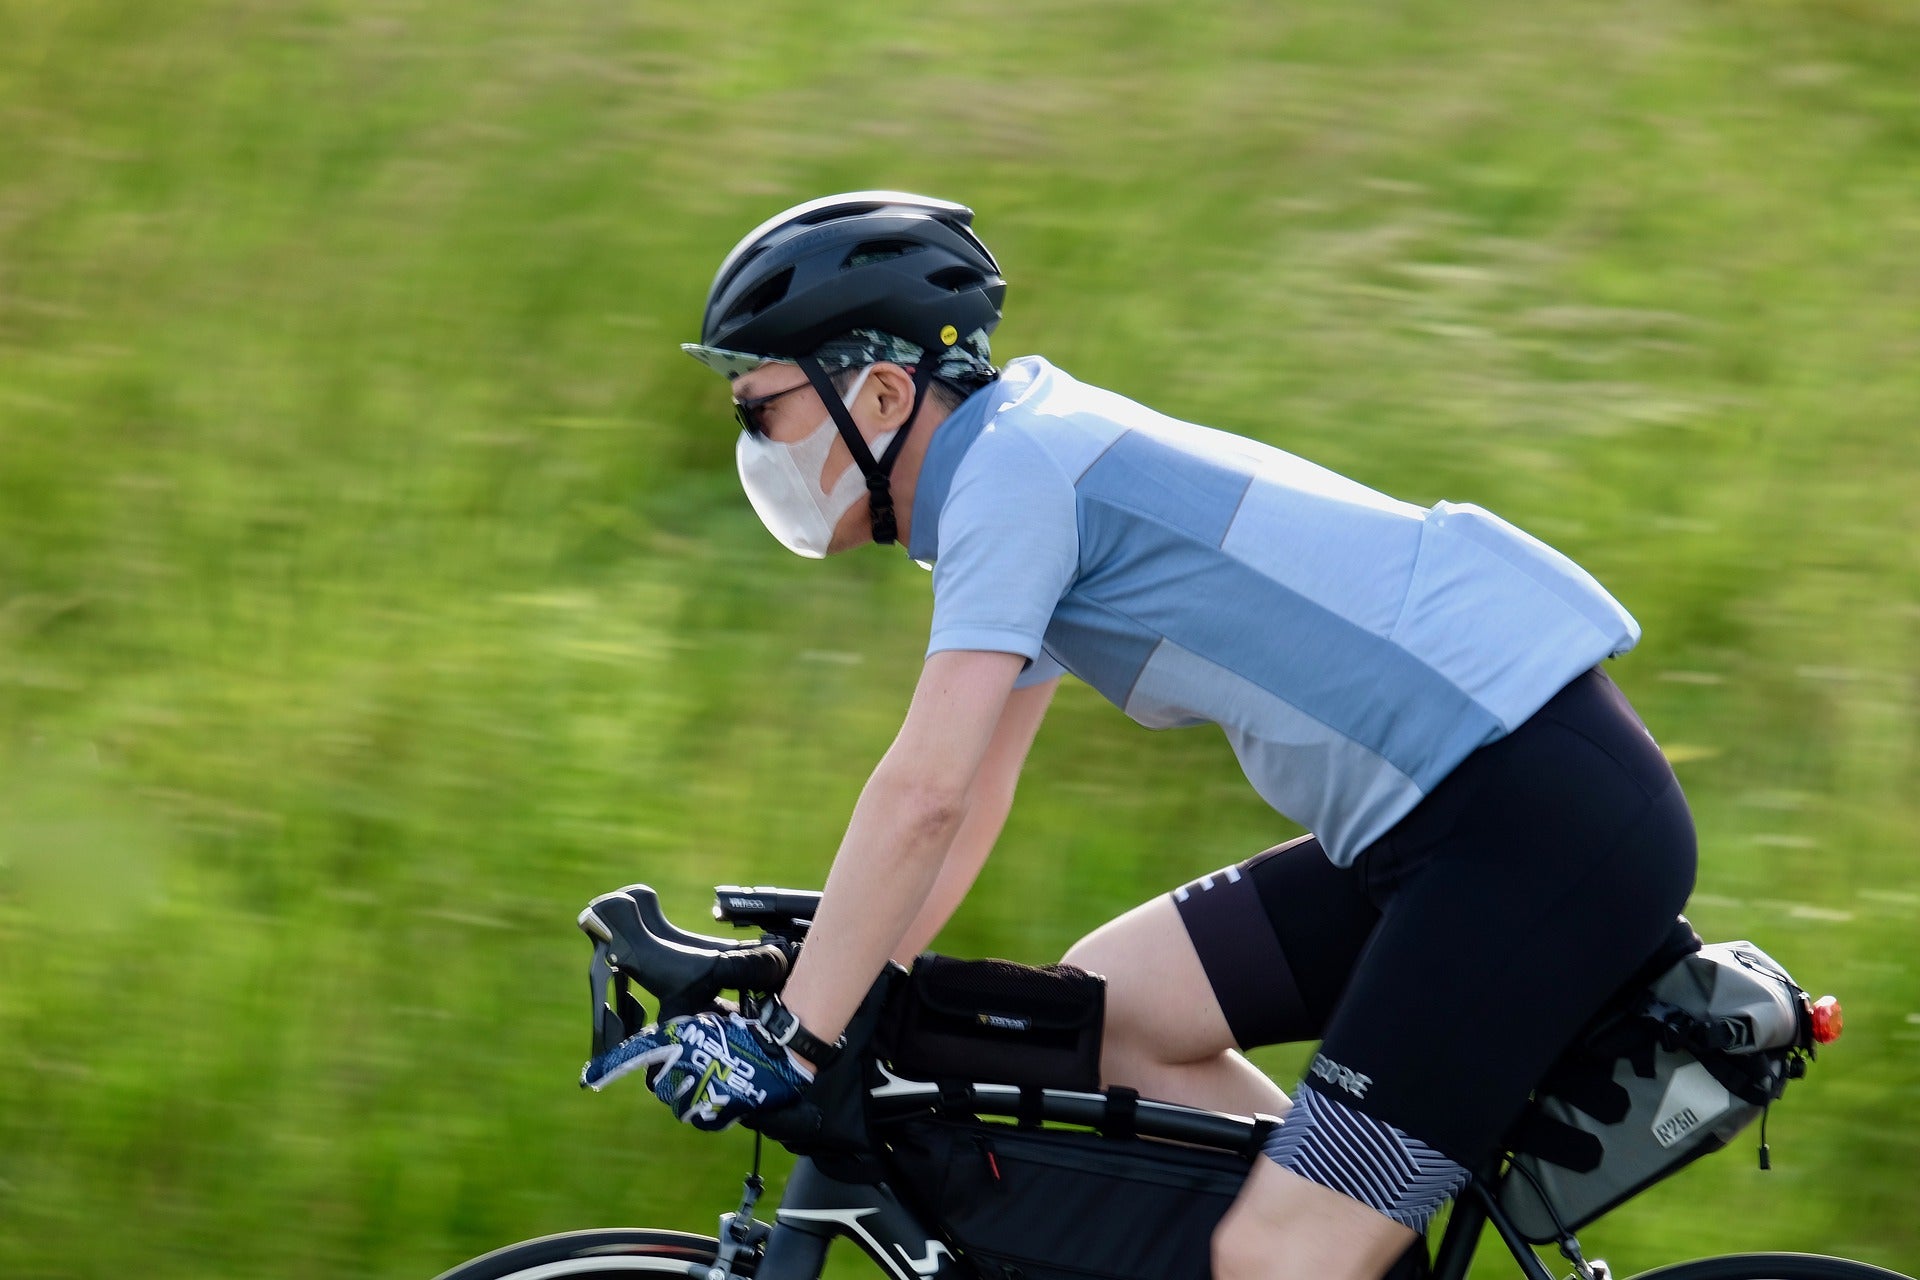 Your Complete Guide to Bike Riding With a Face Mask